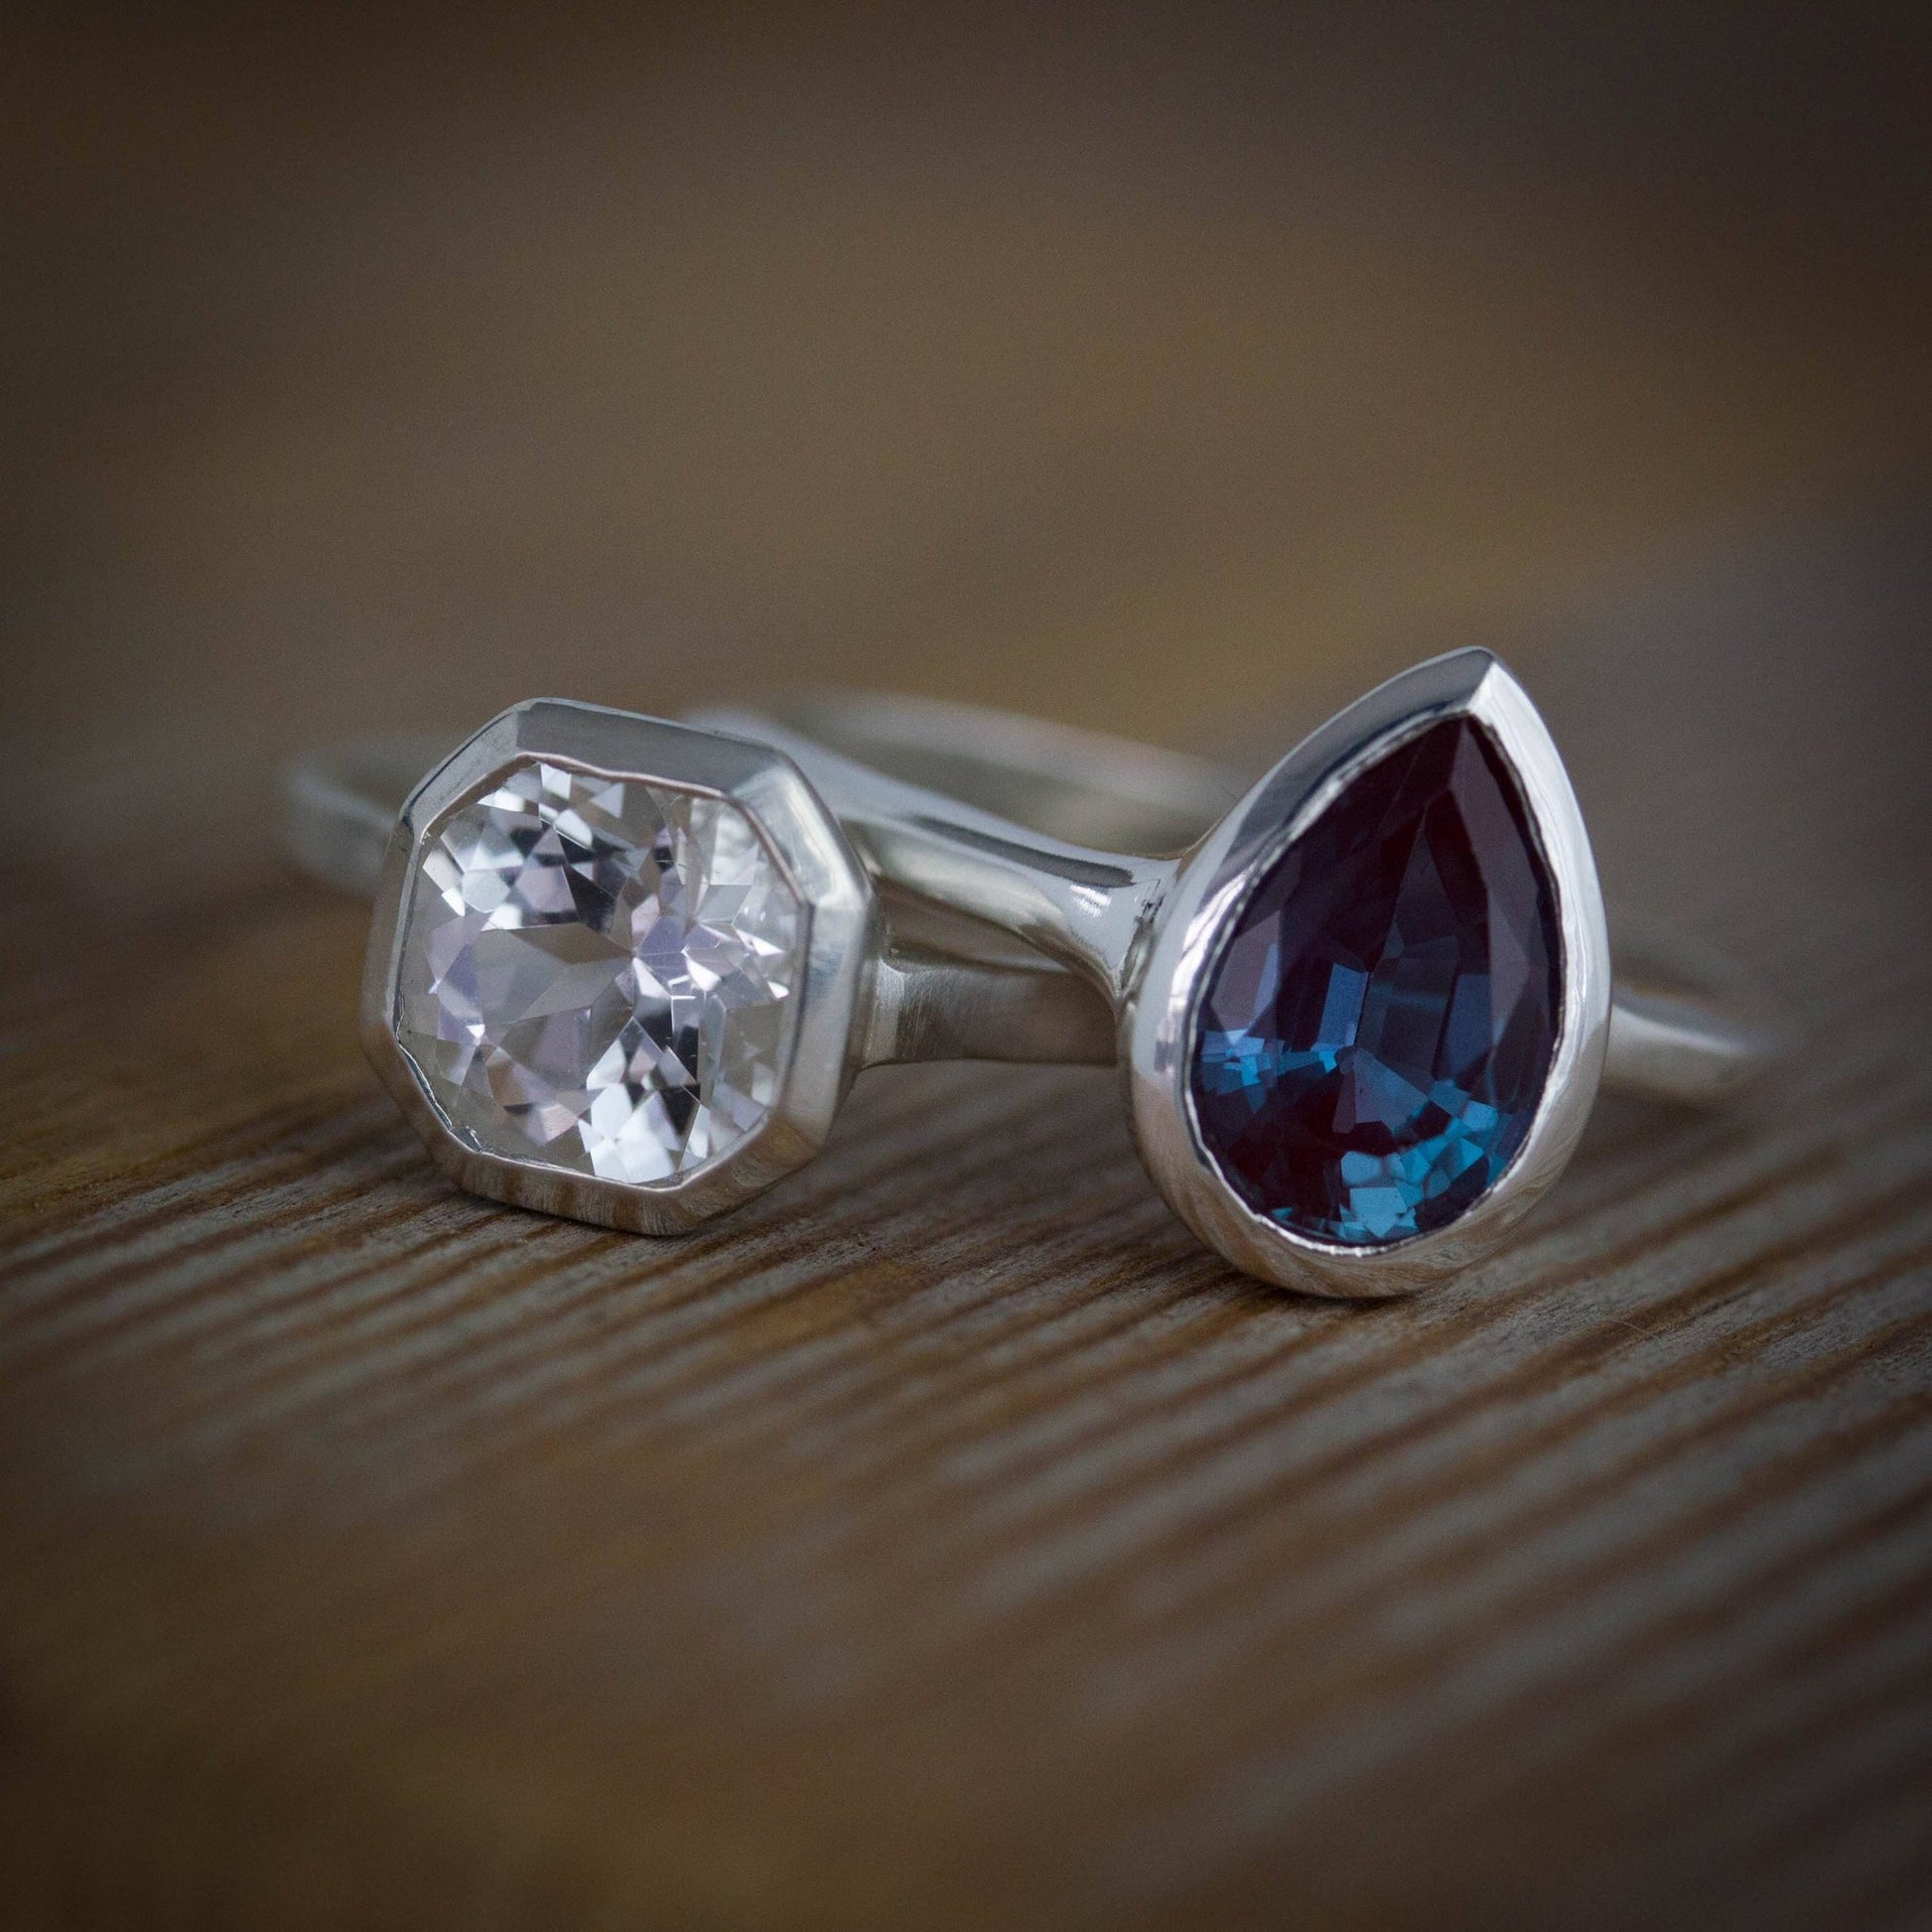 Pear Shaped Alexandrite Ring in Sterling Silver - Madelynn Cassin Designs